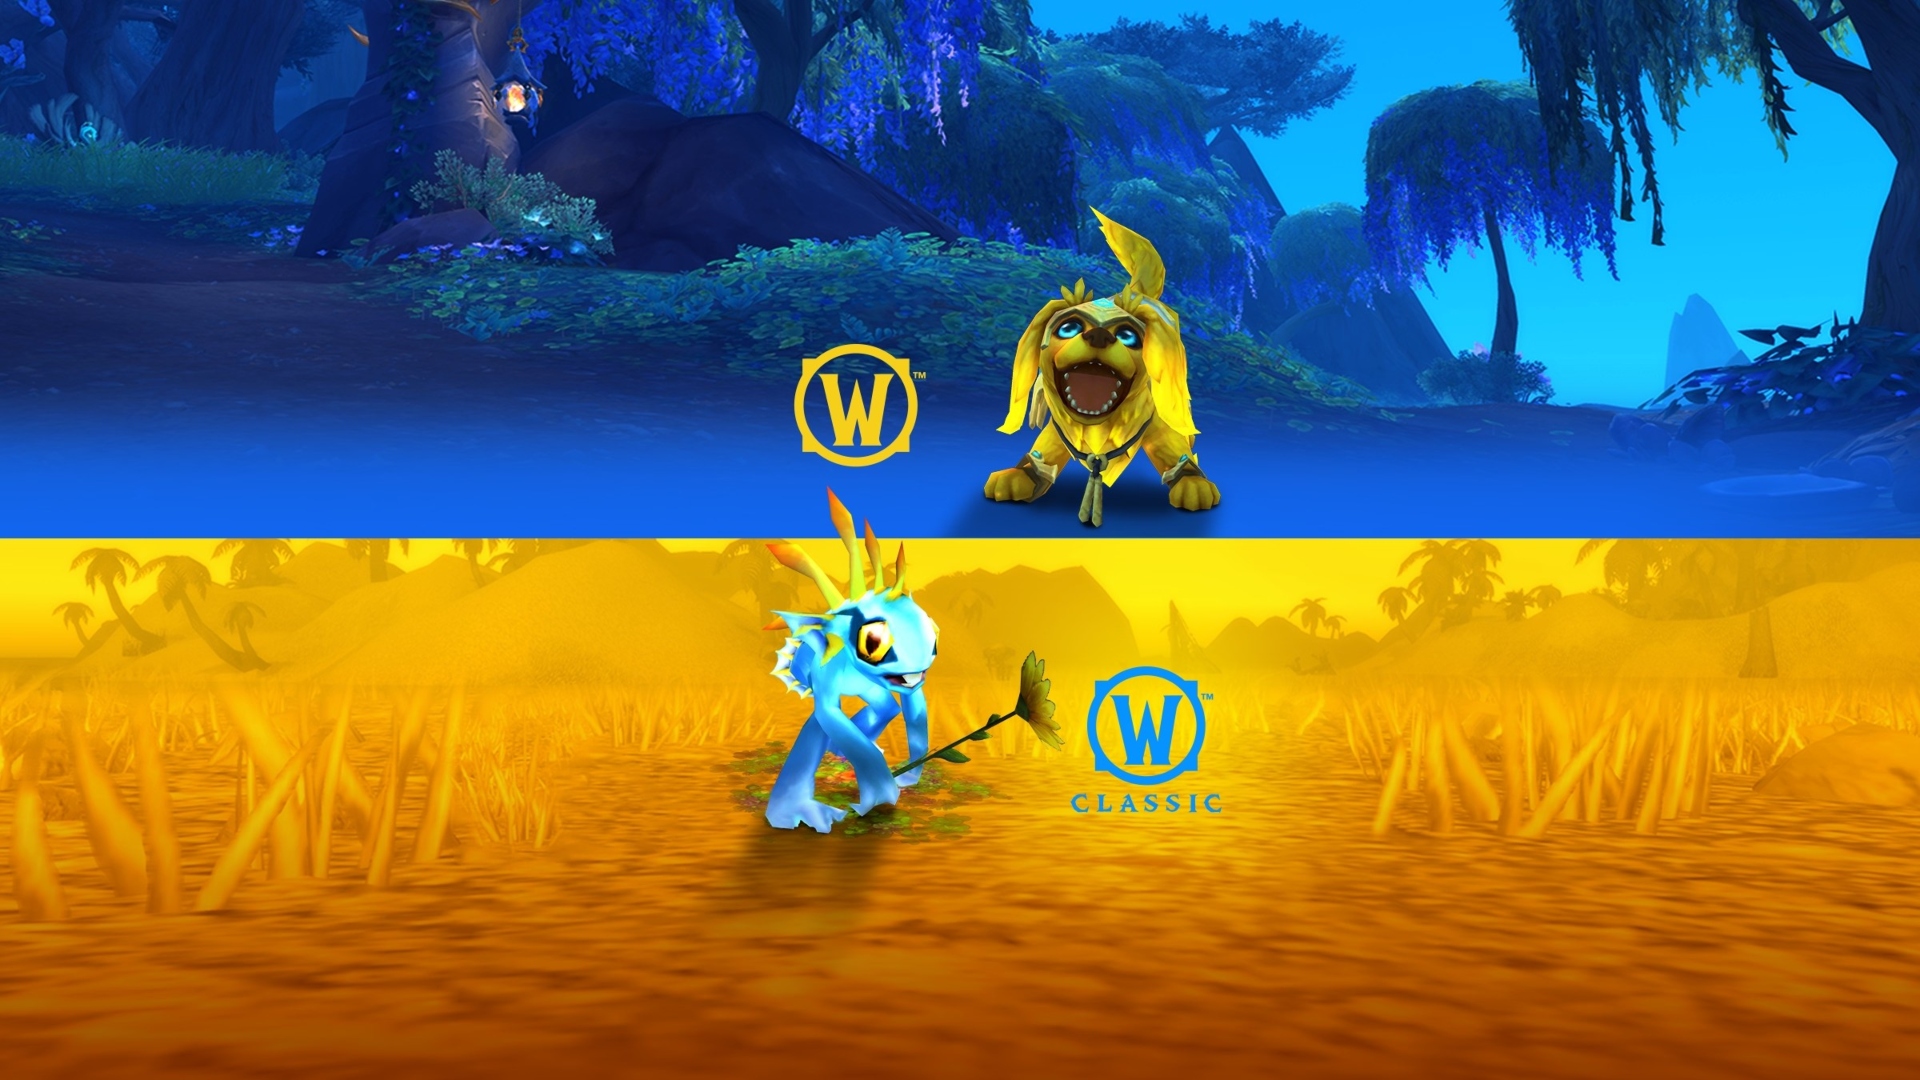 WoW pets: Two little creatures, a golden retriever and a murloc, from Blizzard RPG game World of Warcraft